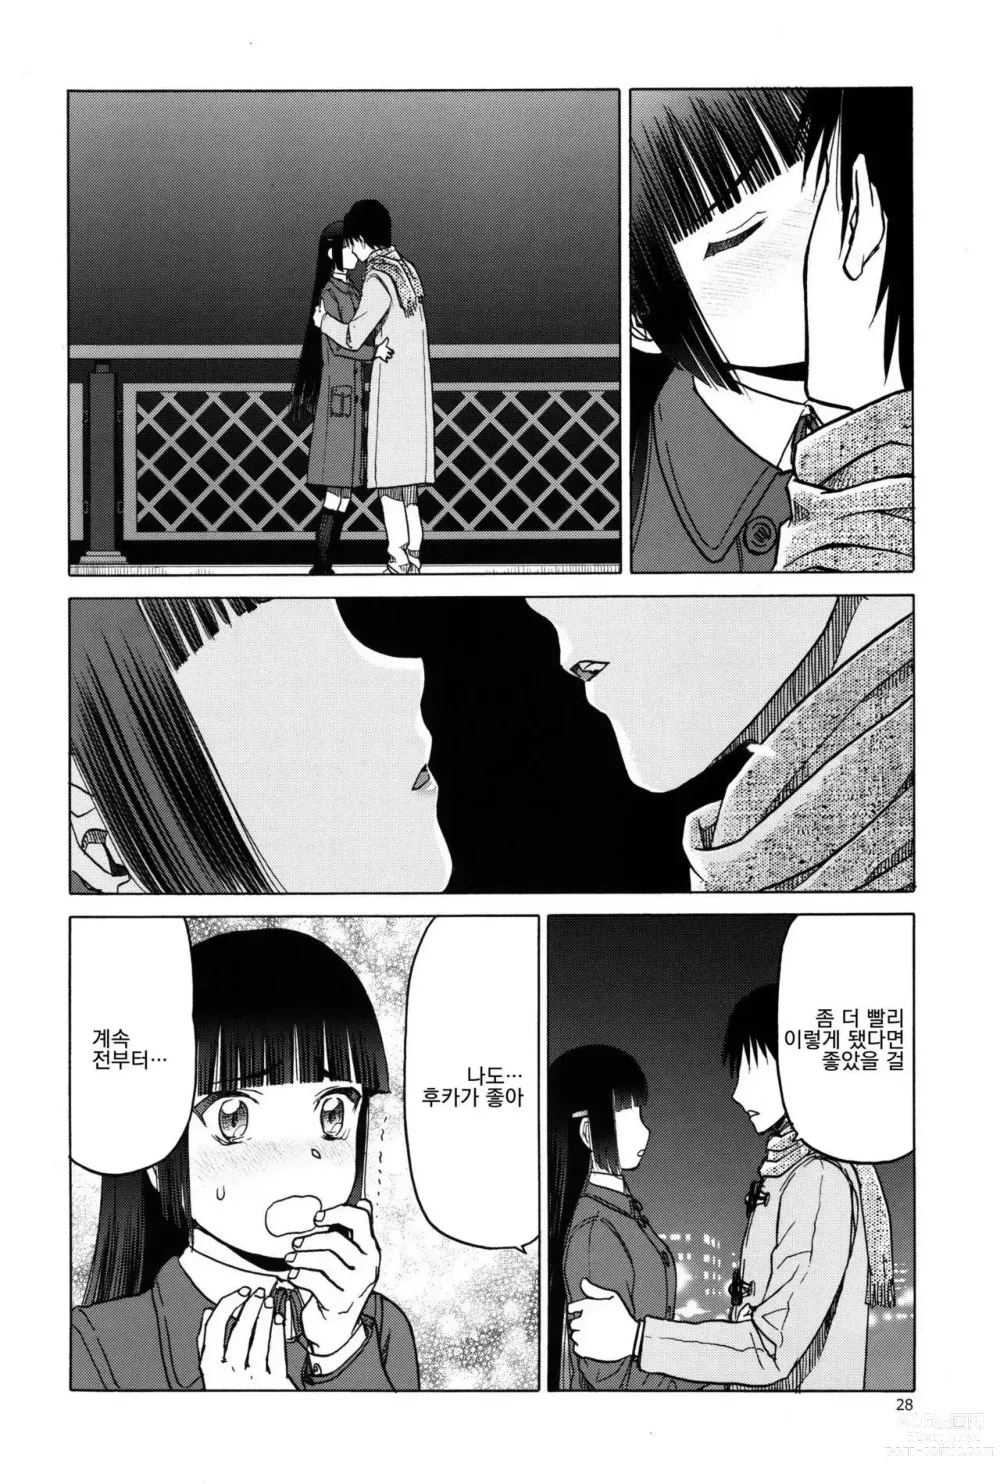 Page 892 of doujinshi blue snow blue 2023